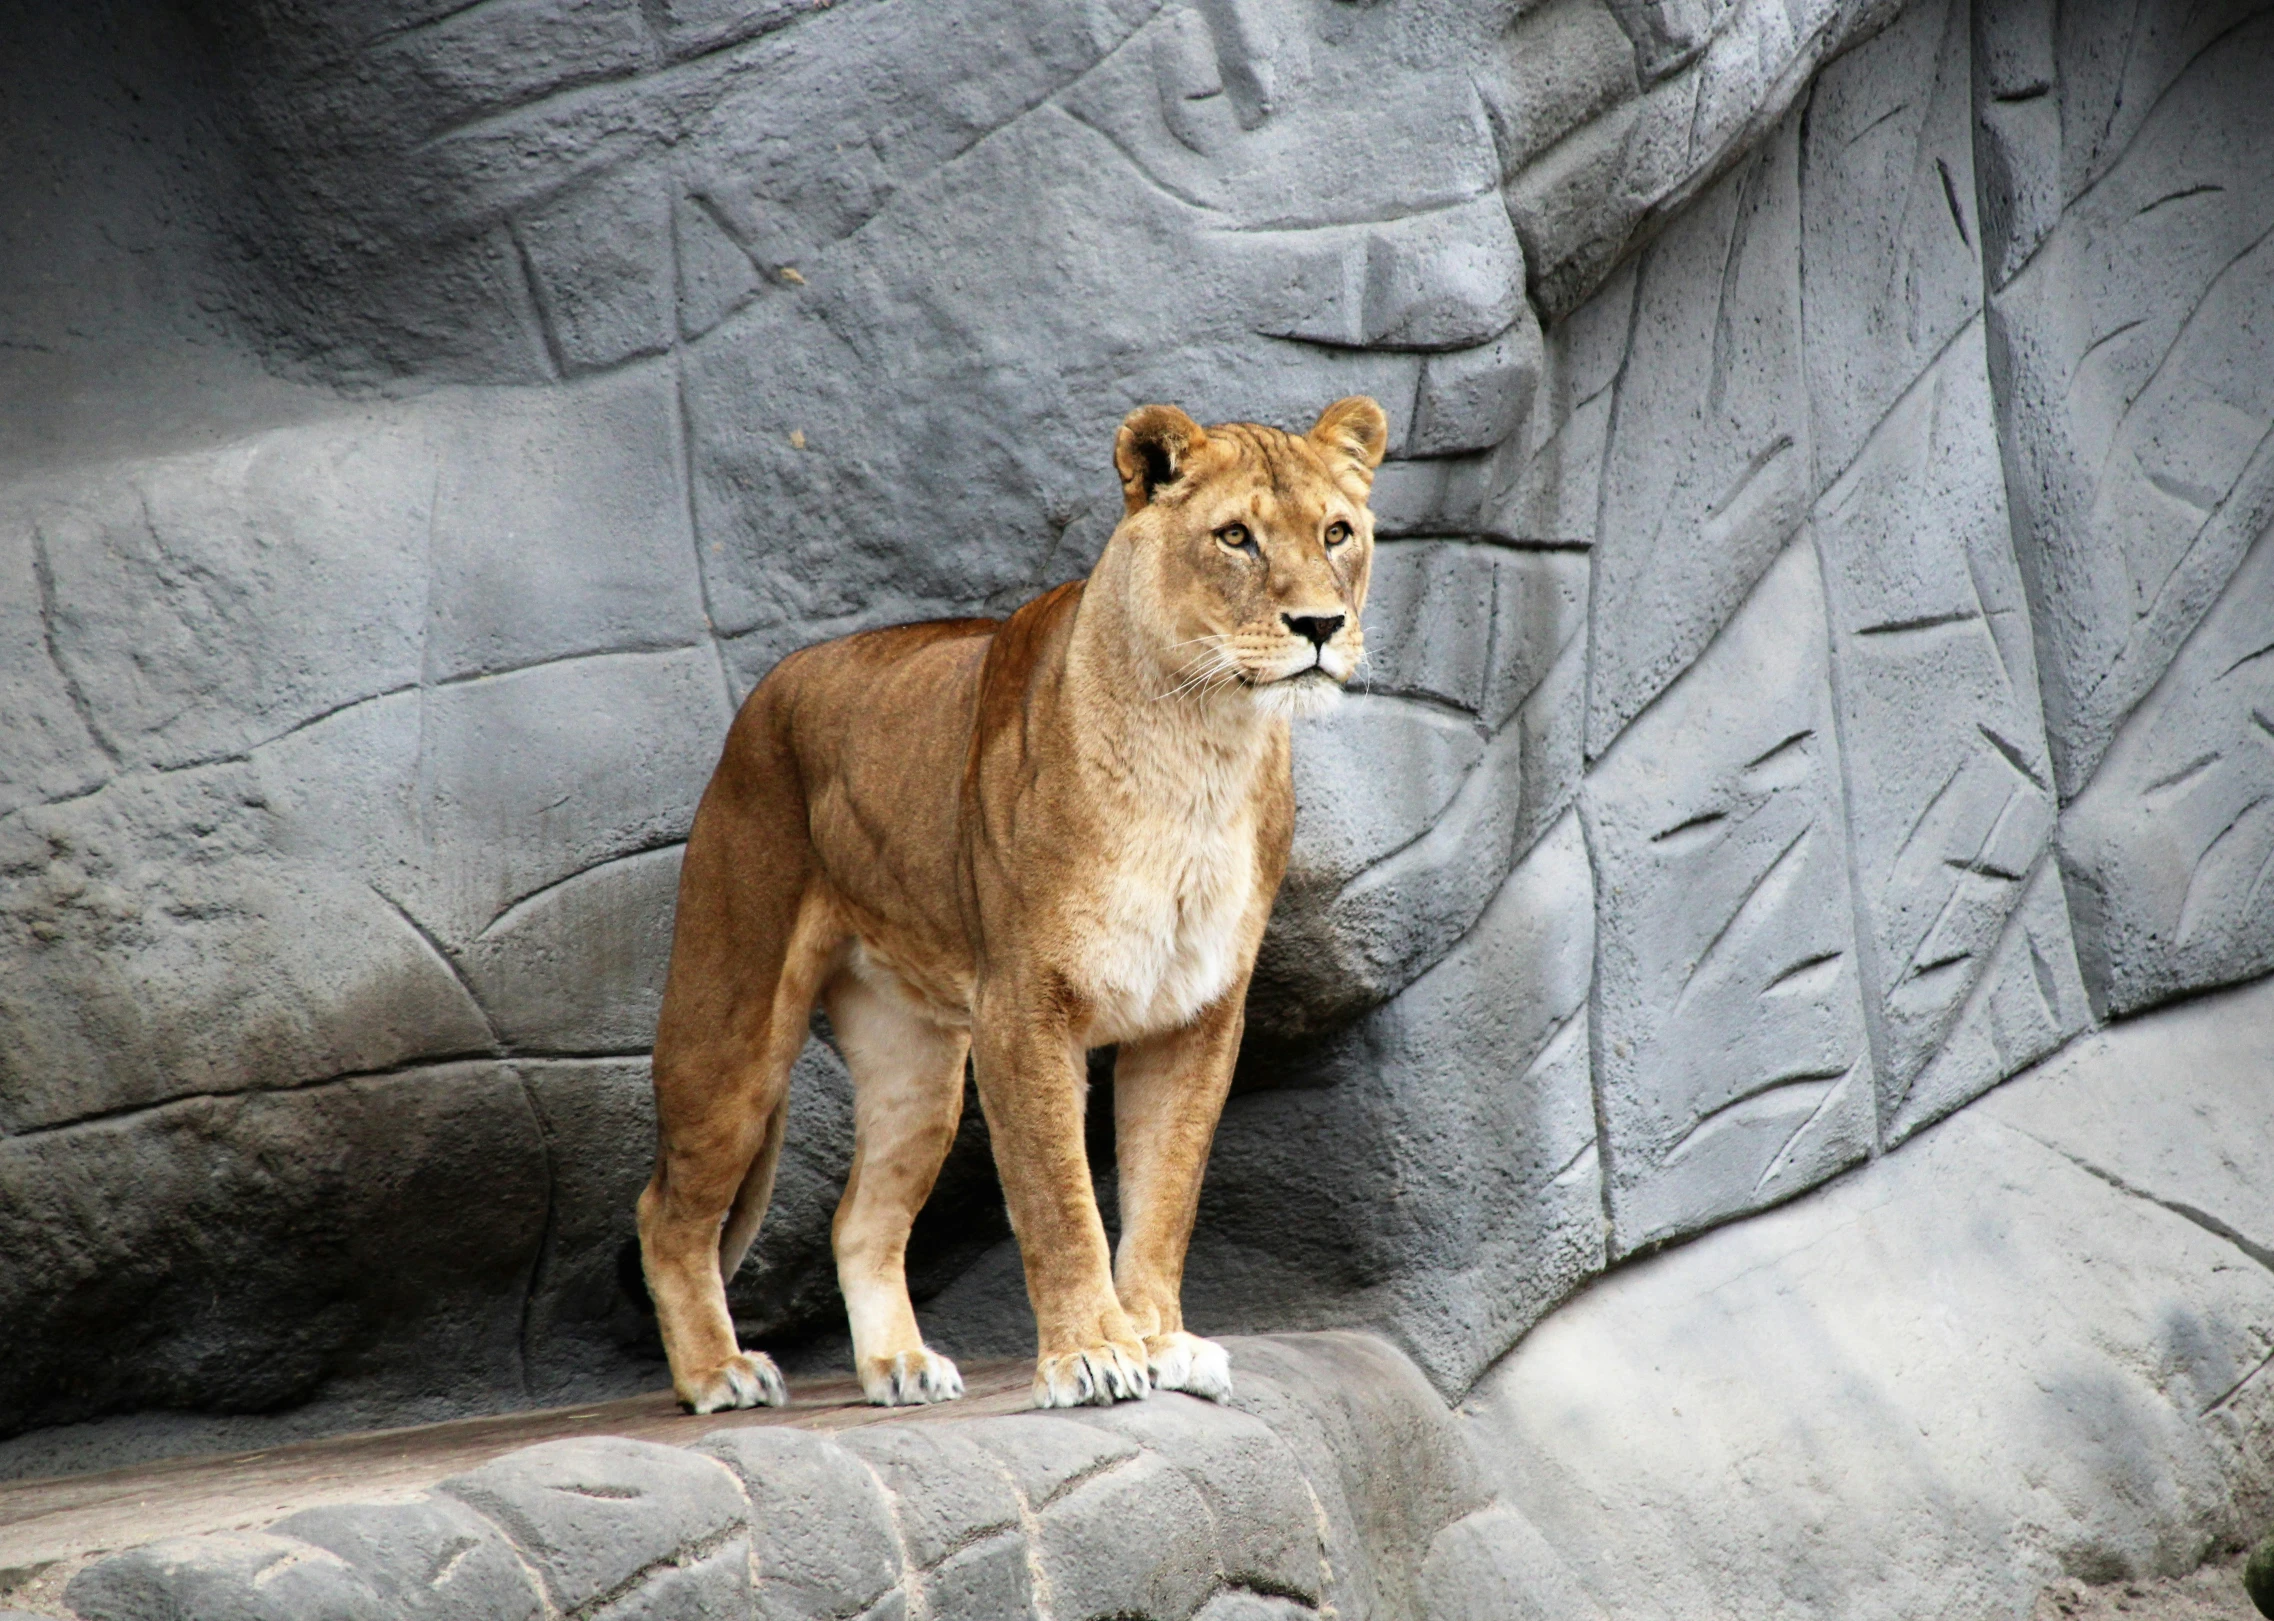 the lion is standing on the ledge near the rocks